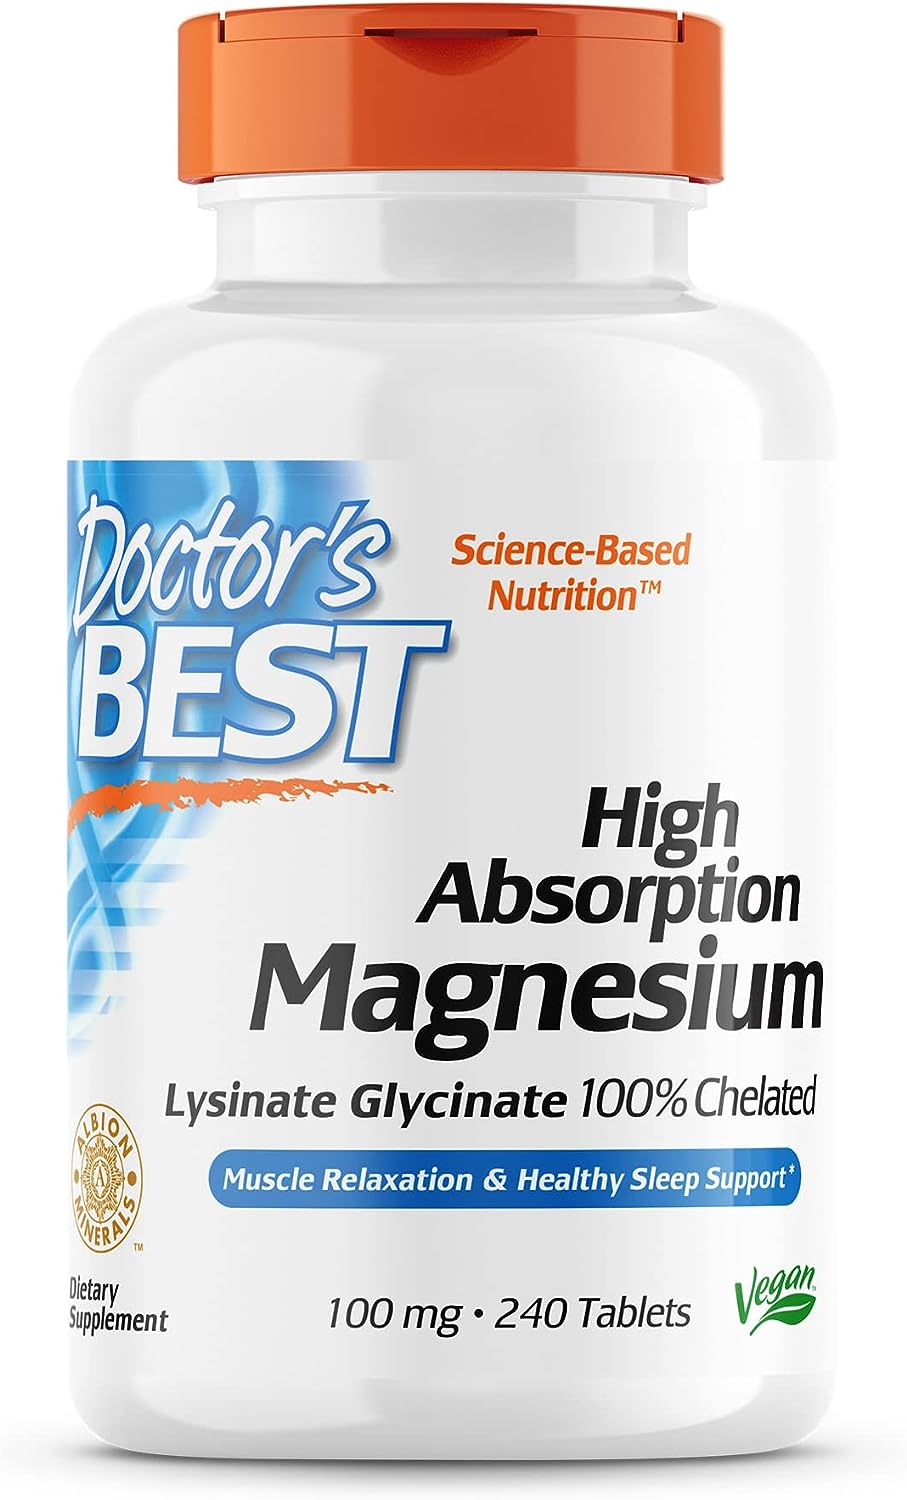 Doctor's Best 30% Off: 240-Ct High Absorption Magnesium Glycinate Lysinate Tablets $11.10, 360-Ct Vitamin D3 5,000 IU Softgel $6.40 & More w/ S&S + FS w/ Prime or on $35+